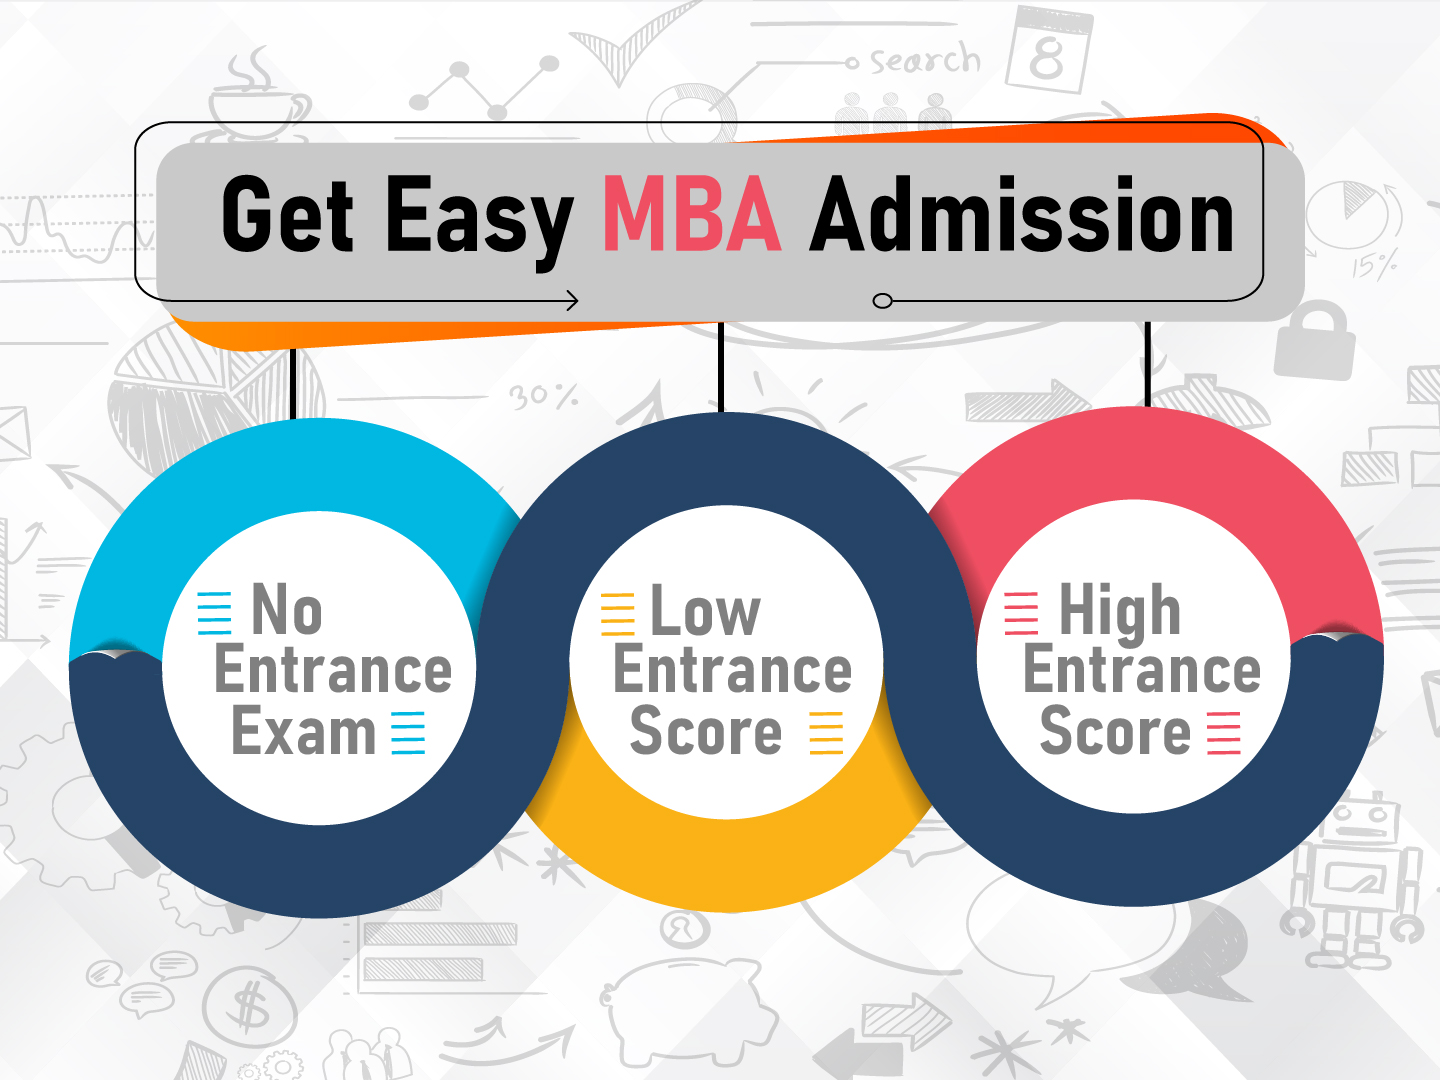 How to Pursue MBA if scored low marks in the Entrance Exam?